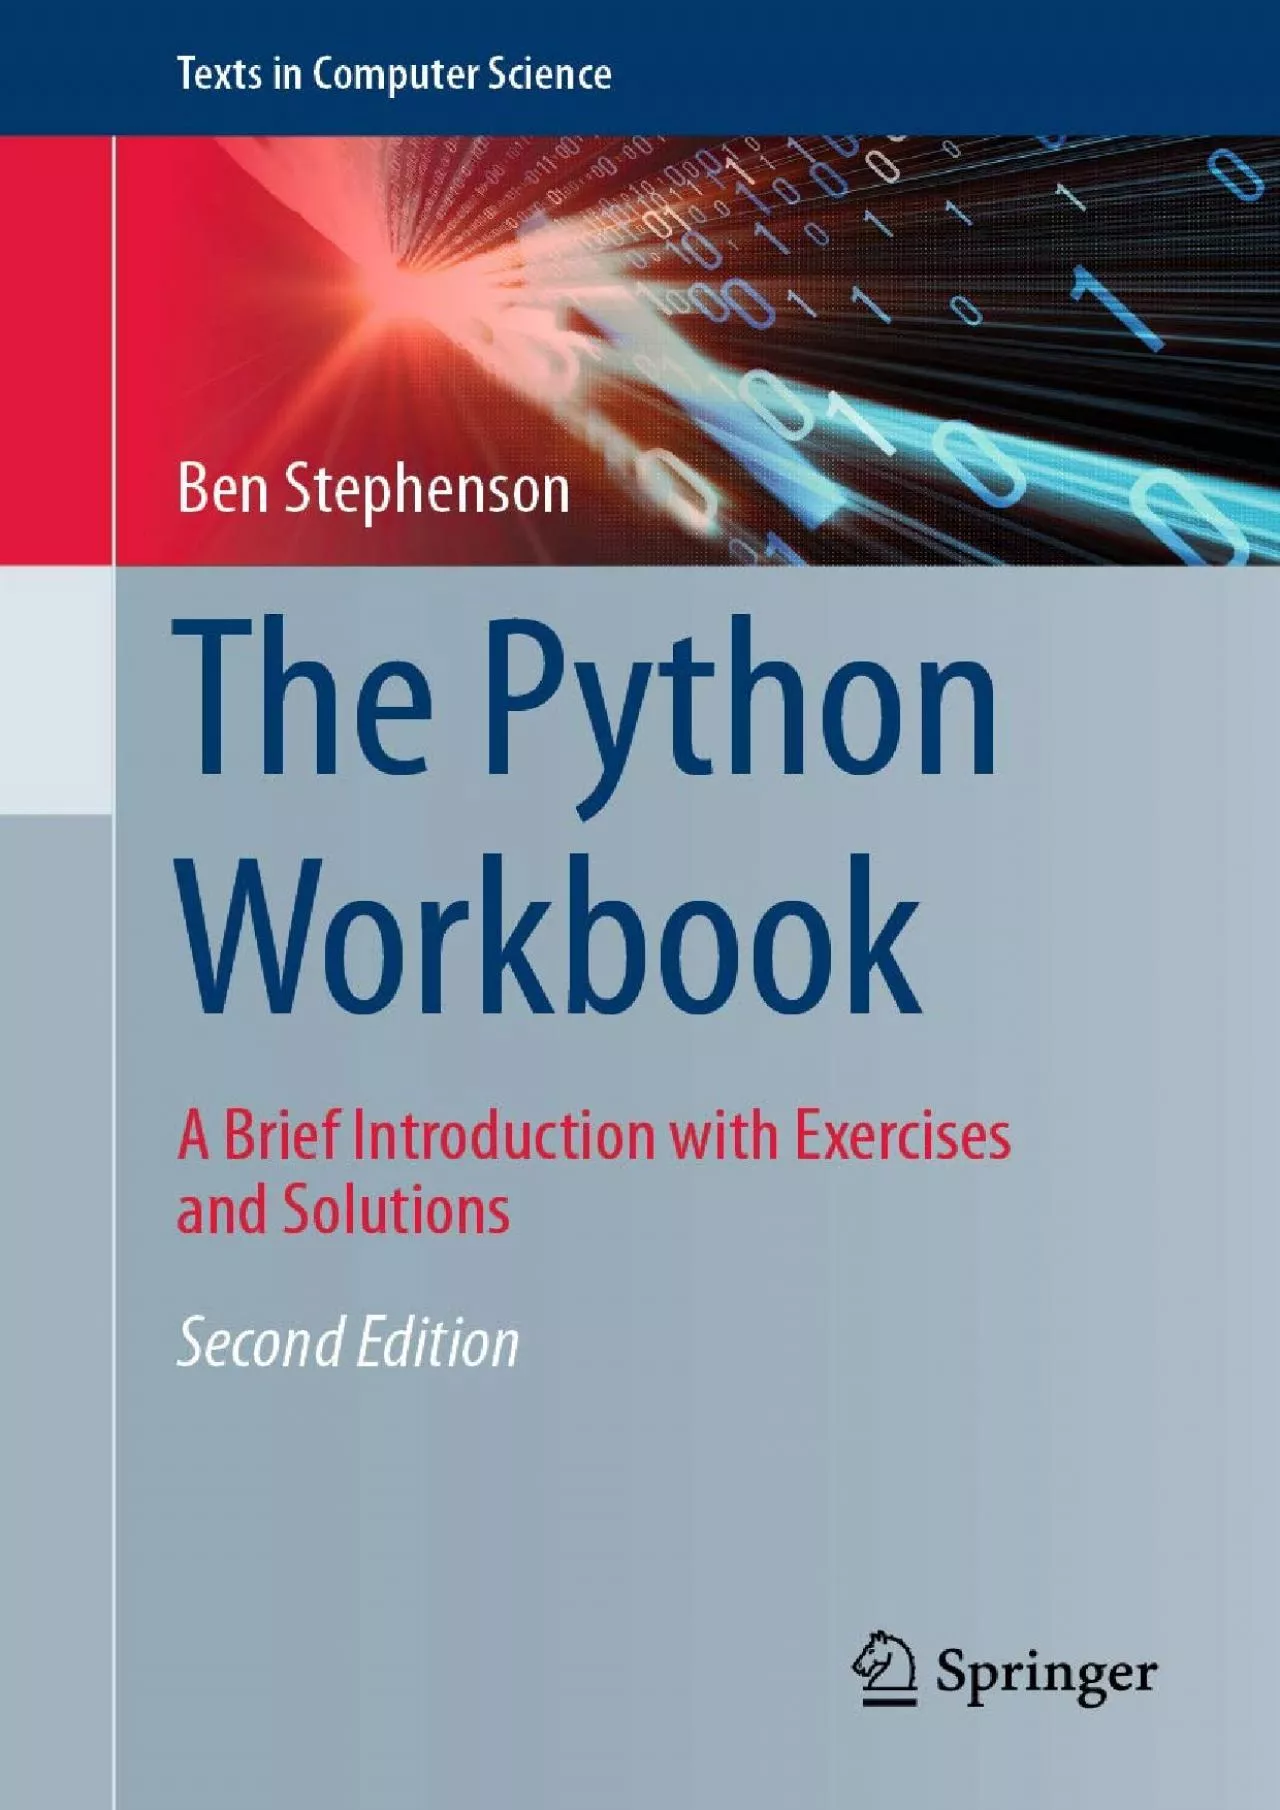 [READ]-The Python Workbook: A Brief Introduction with Exercises and Solutions (Texts in